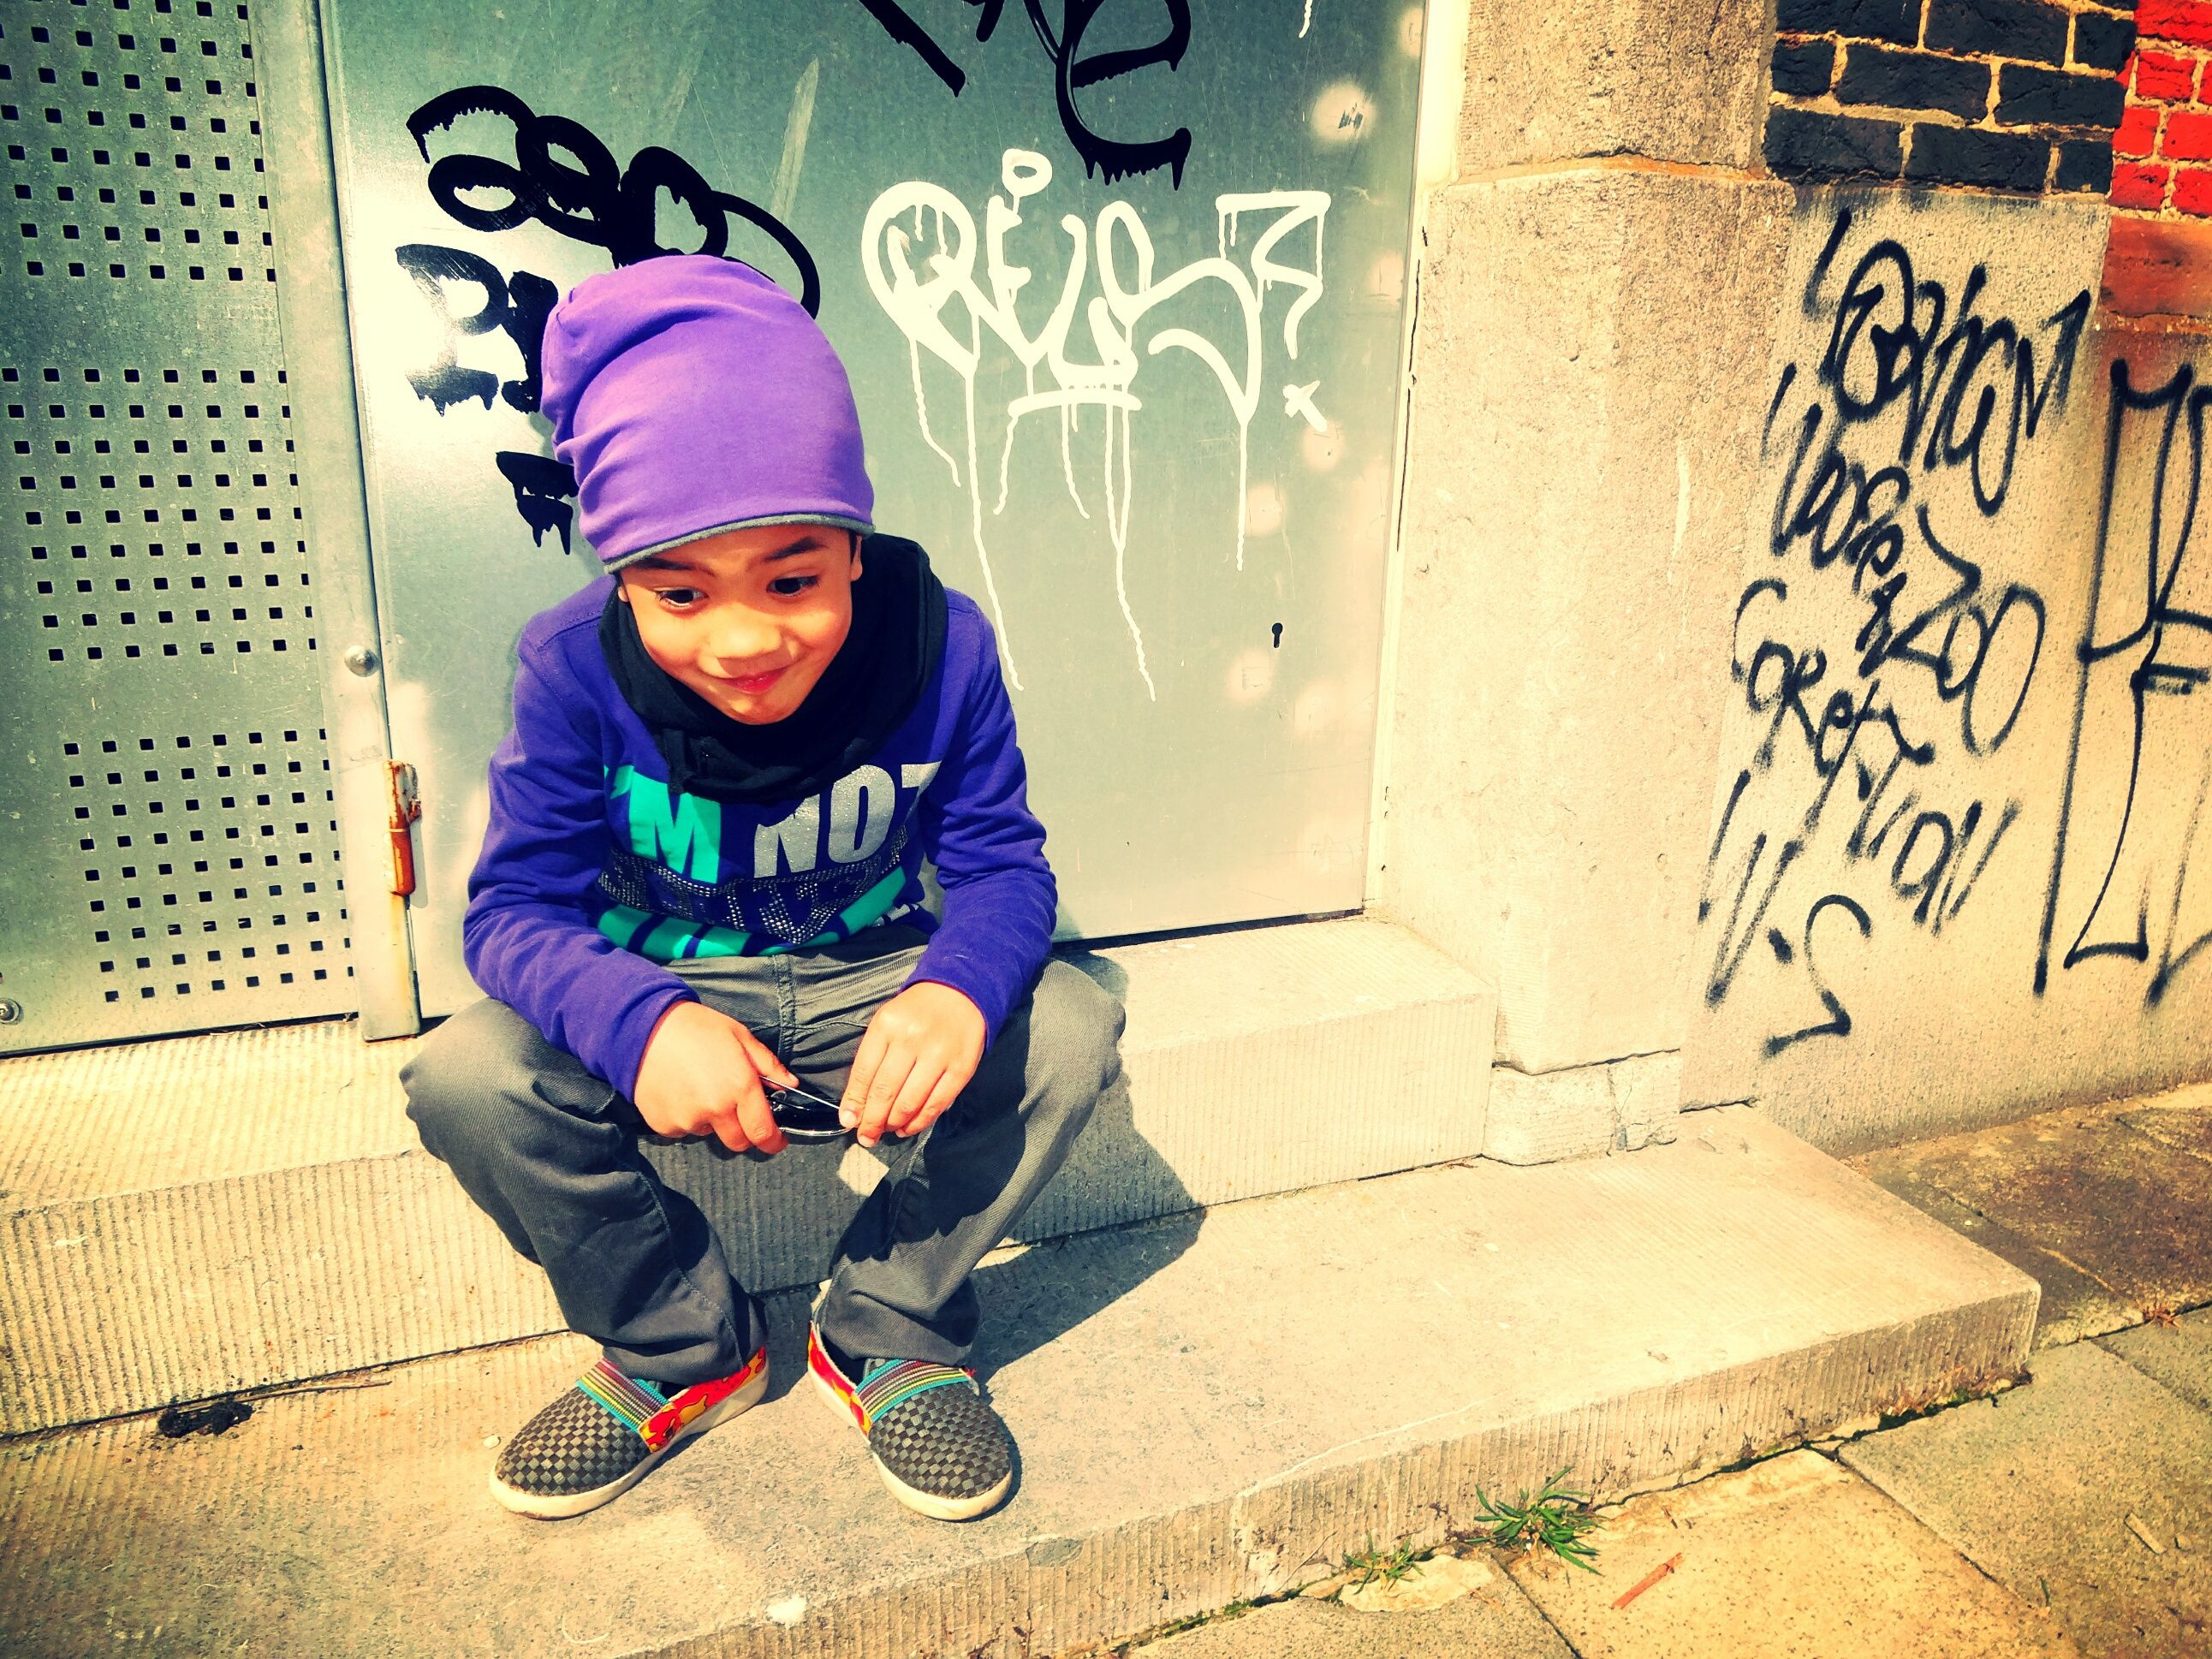 A boy in a purple hat, swag wallpaper and image